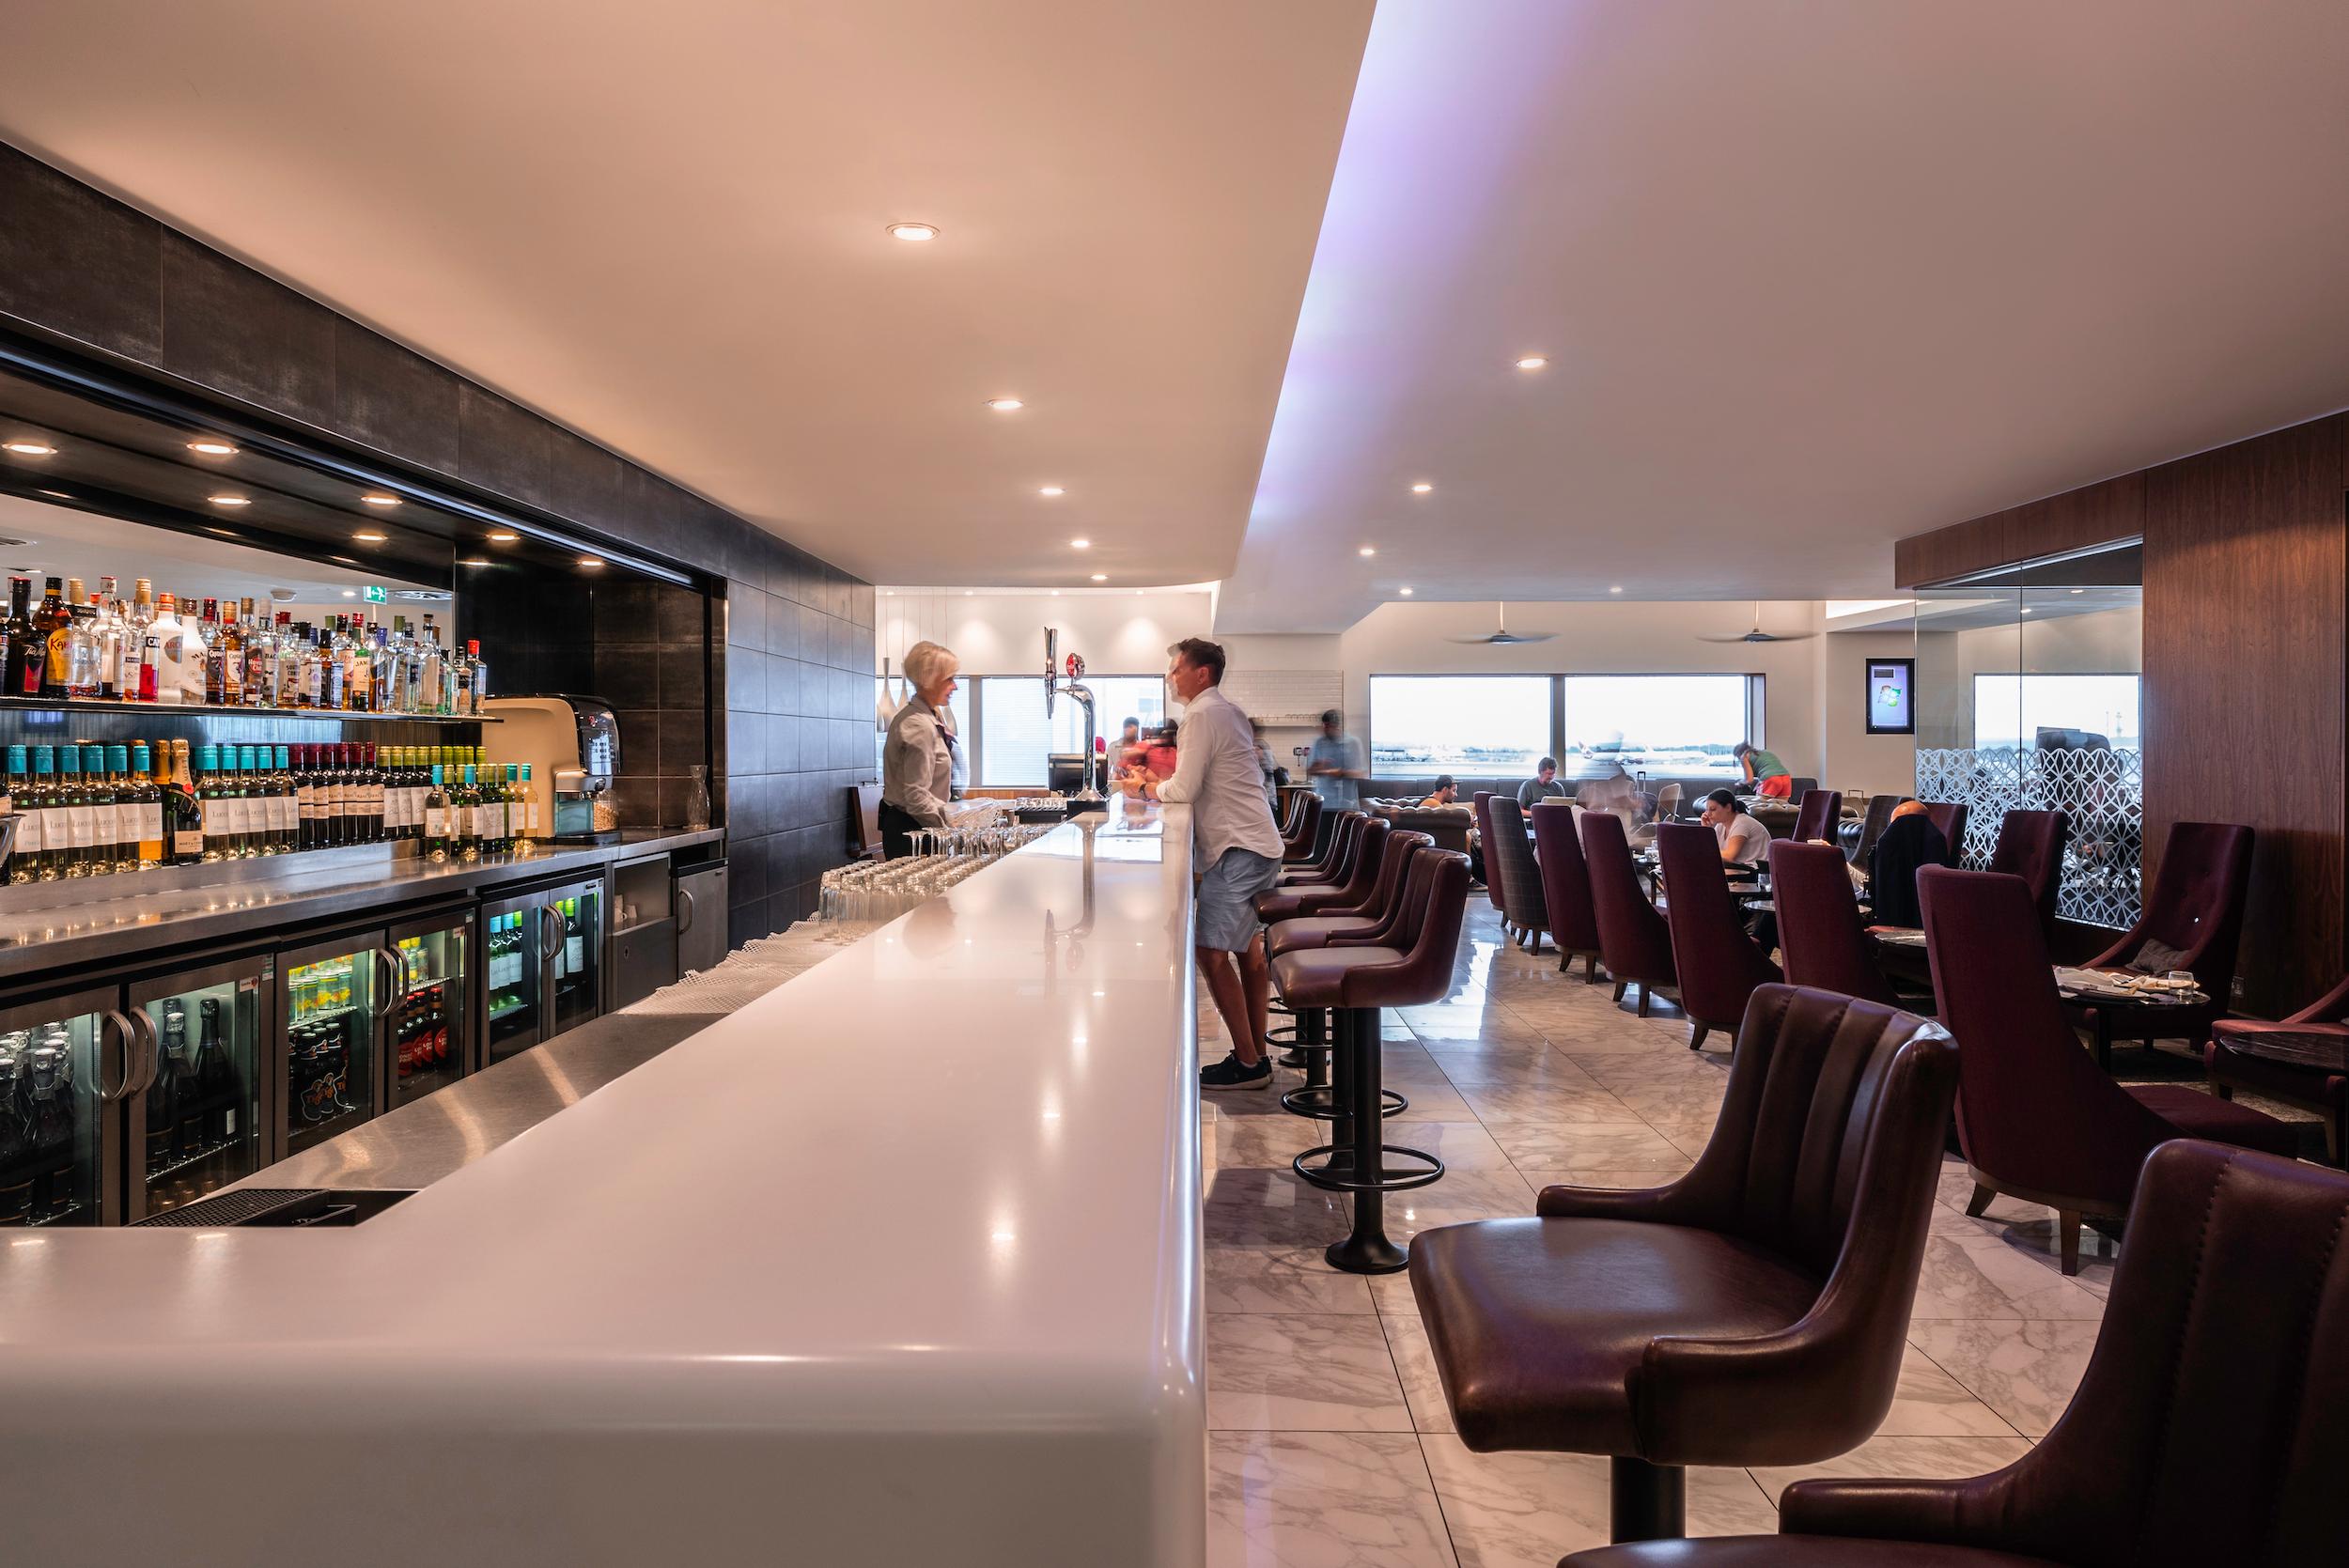 Heathrow Airport No1 Lounge Bar and People